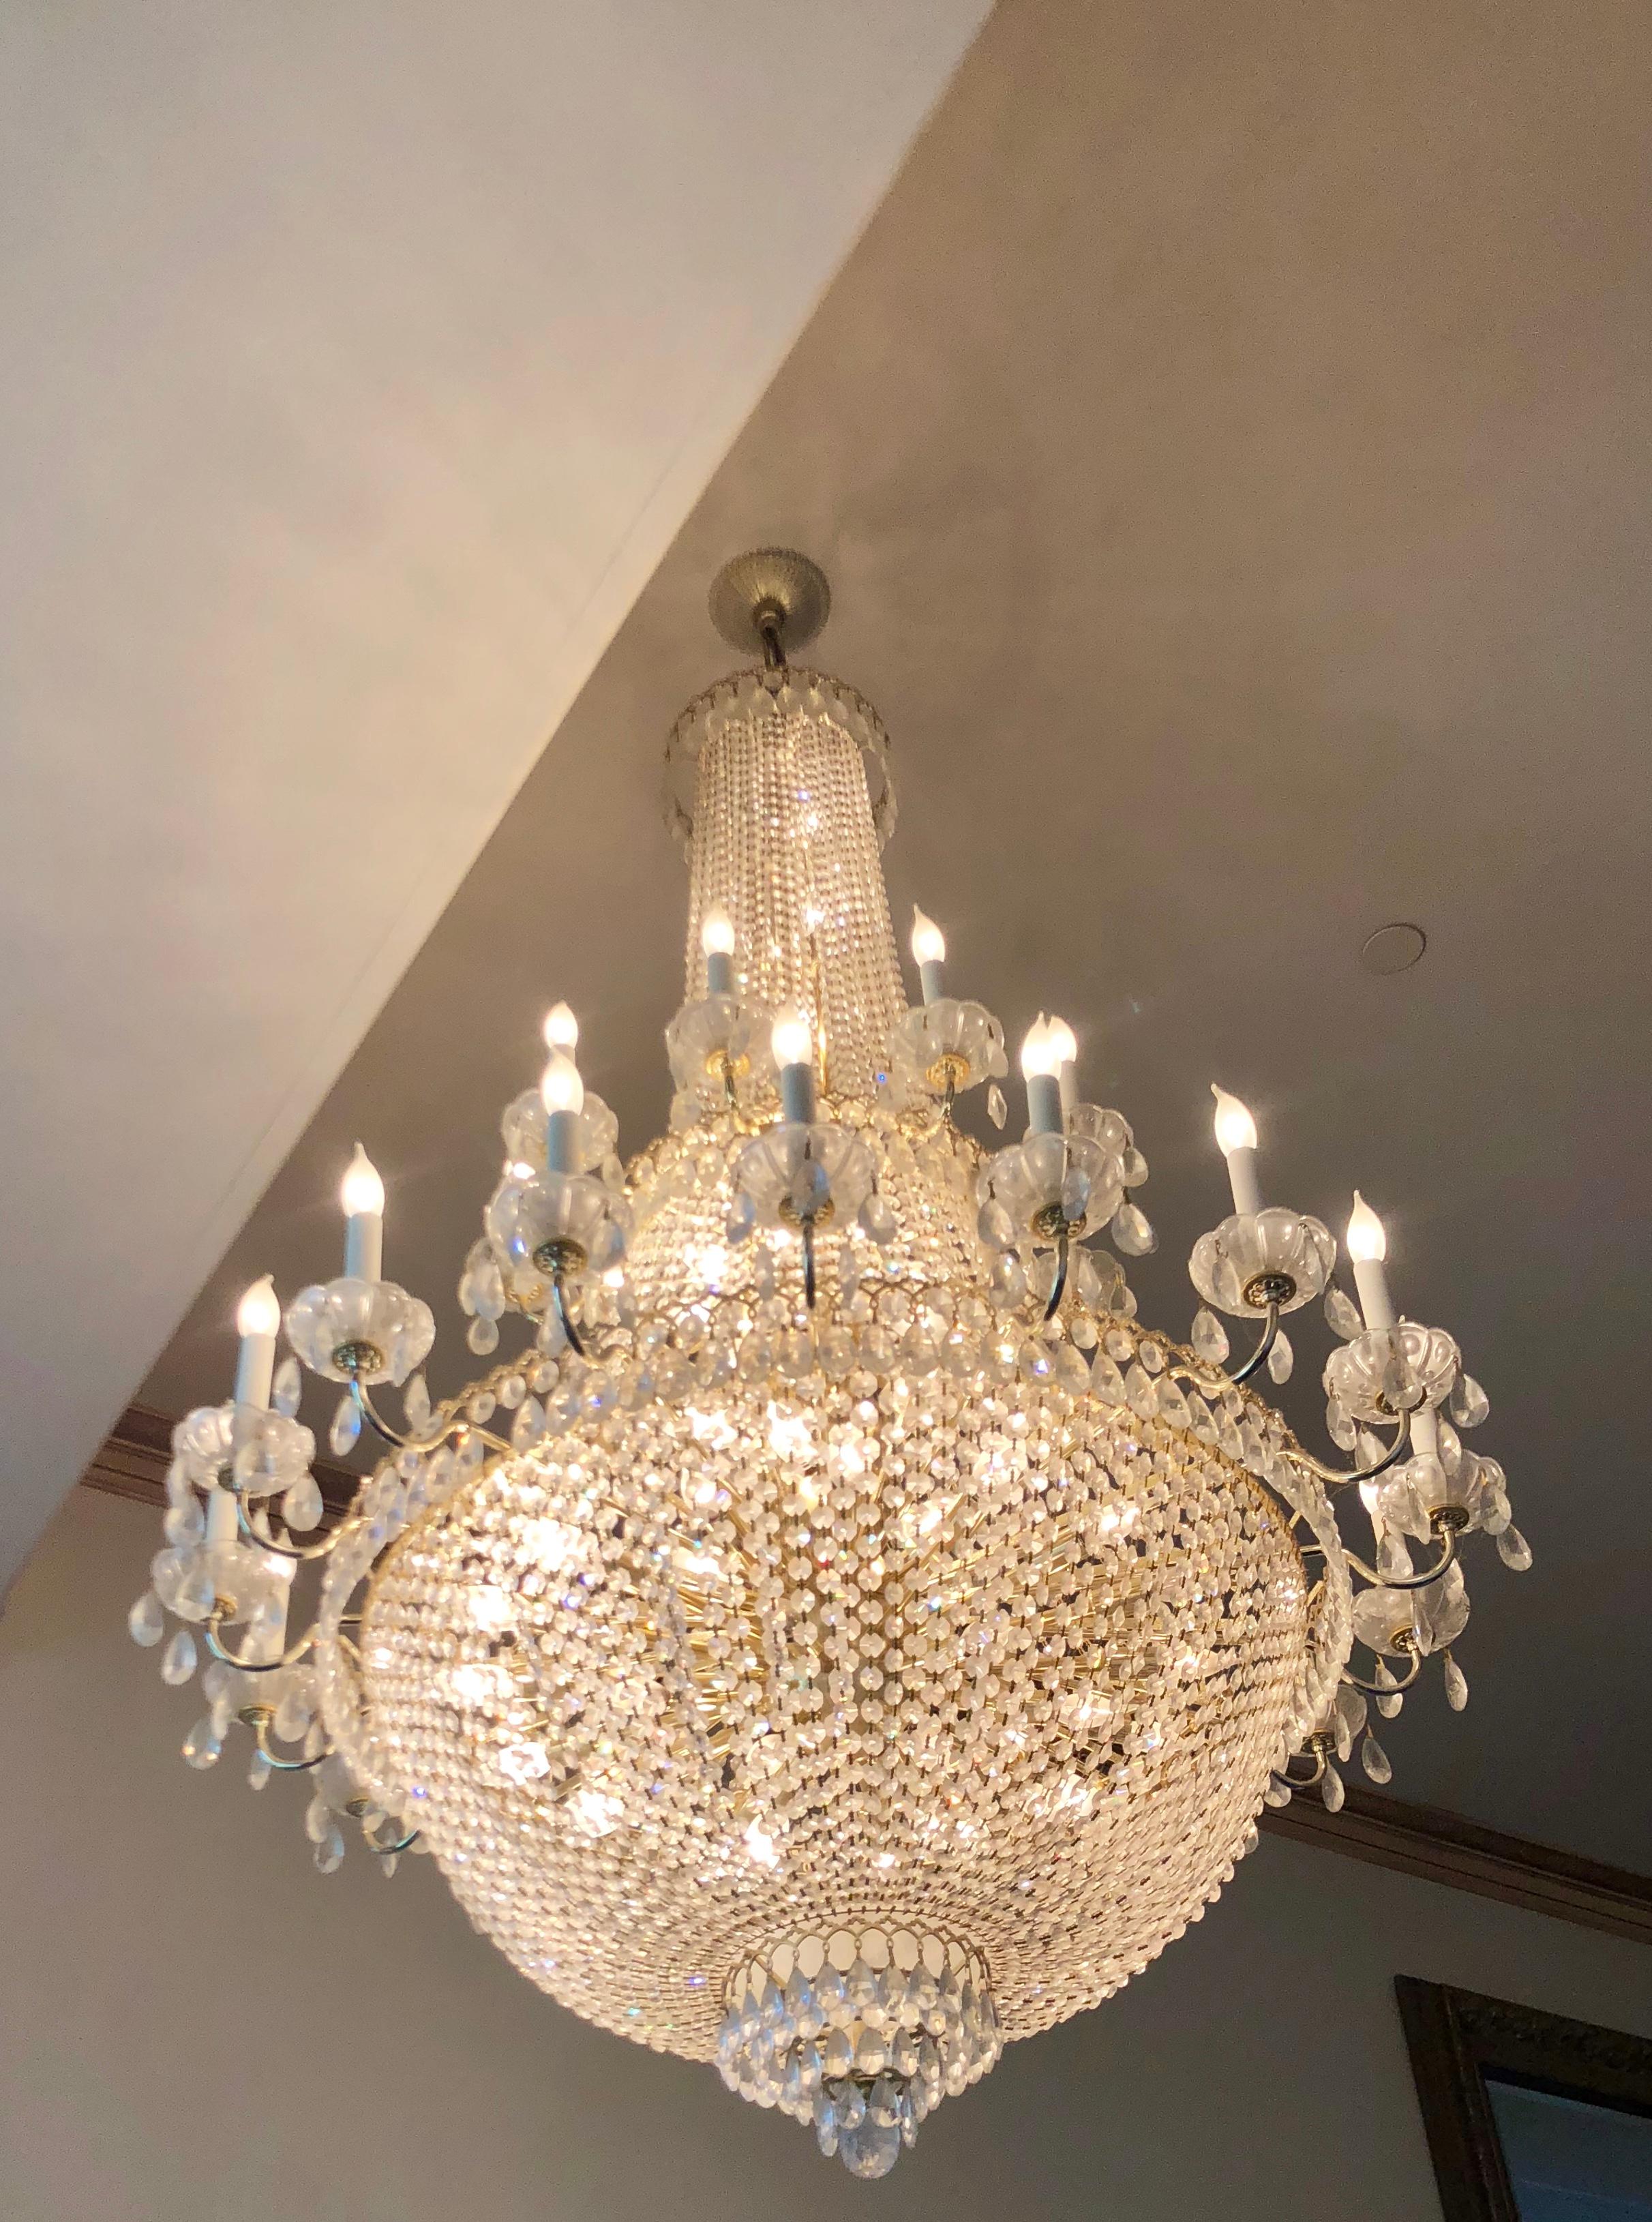 Very elegant, finest quality, estate Schonbek Swarovski Gemcut crystal chandelier features classic Napoleonic Empire style. This stately and magnificent chandelier has two tiers and approximately 84 incandescent lights. It measures 65